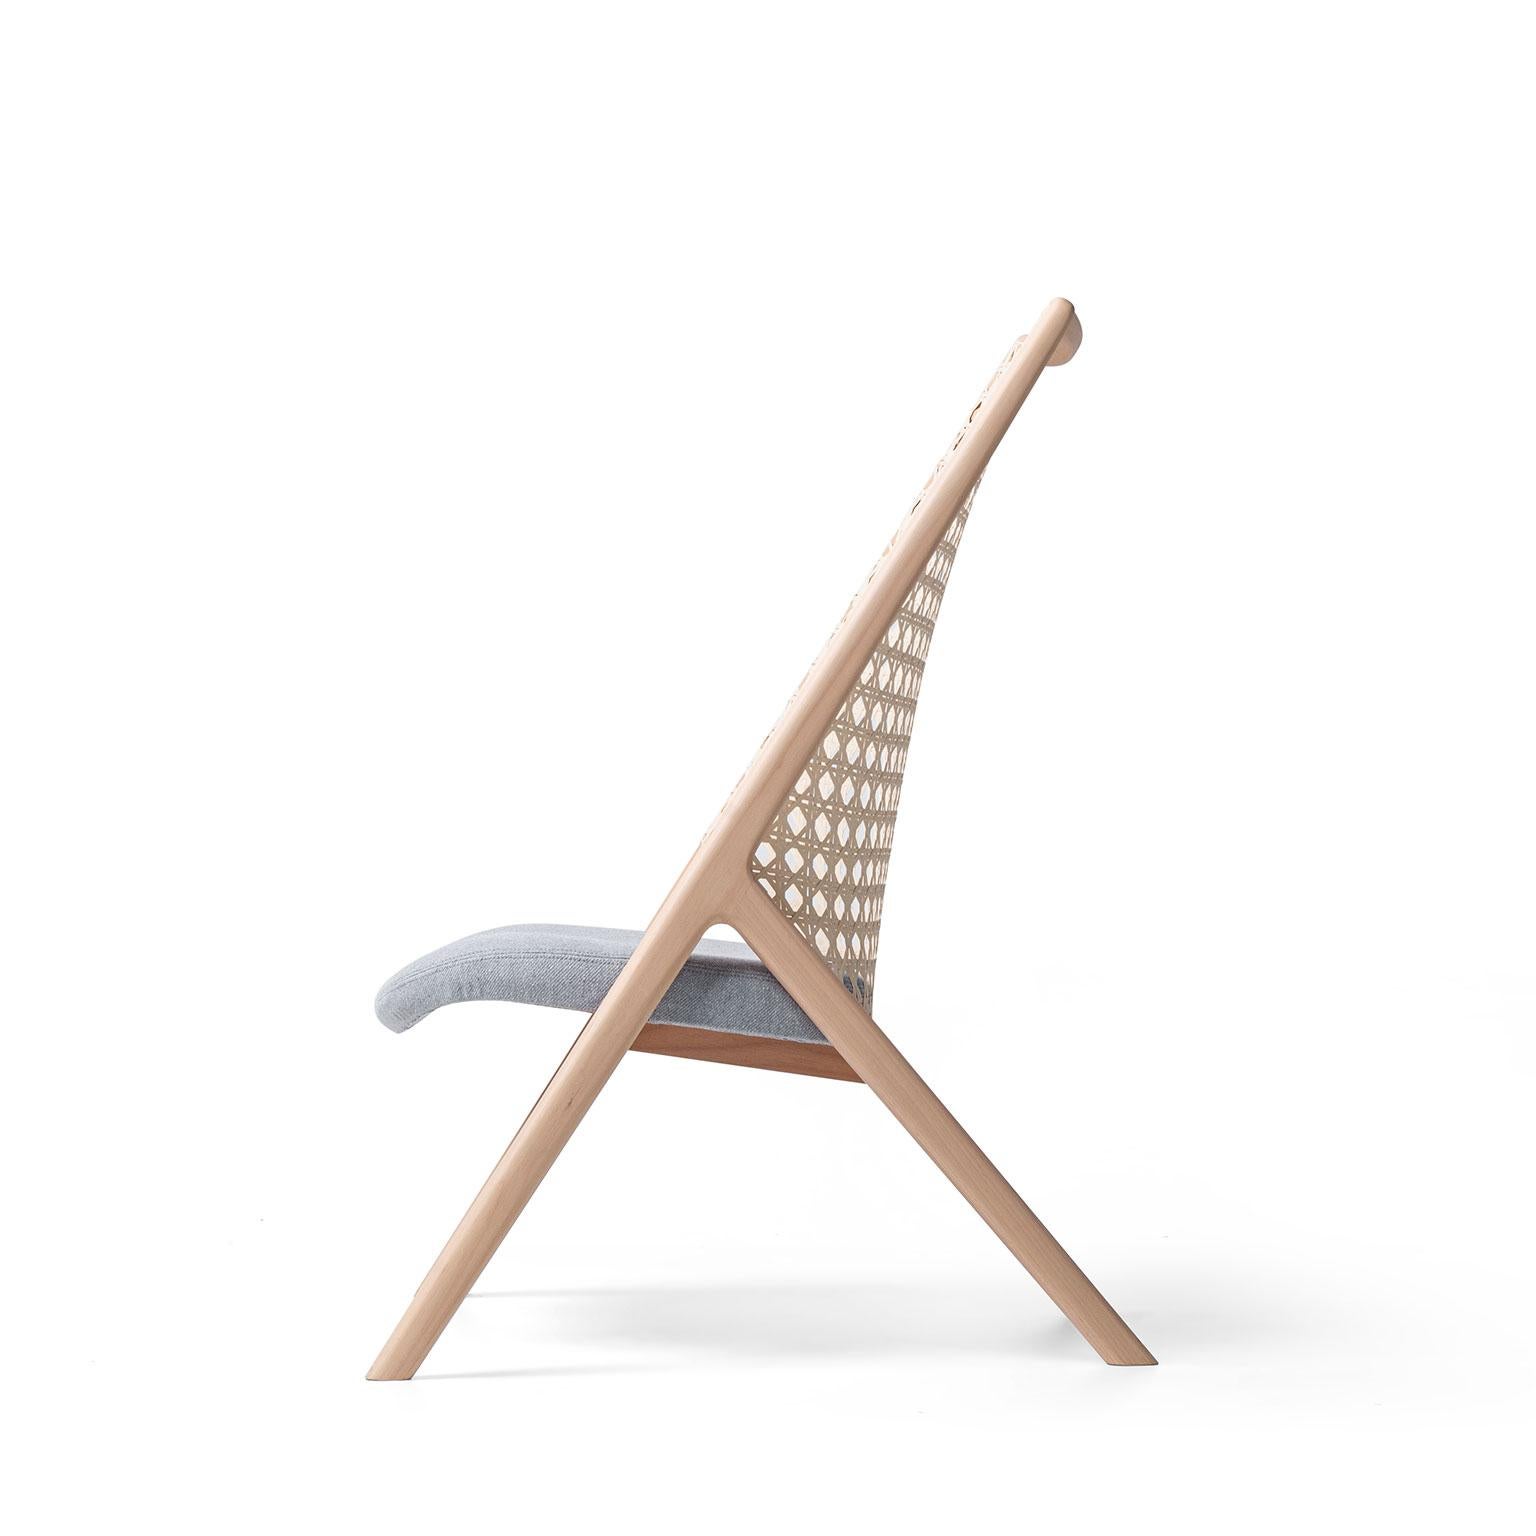 Tela Lounge Chair in Recycled Cotton, by Wentz, Brazilian Contemporary Design In New Condition For Sale In Caxias do Sul, Rio Grande do Sul